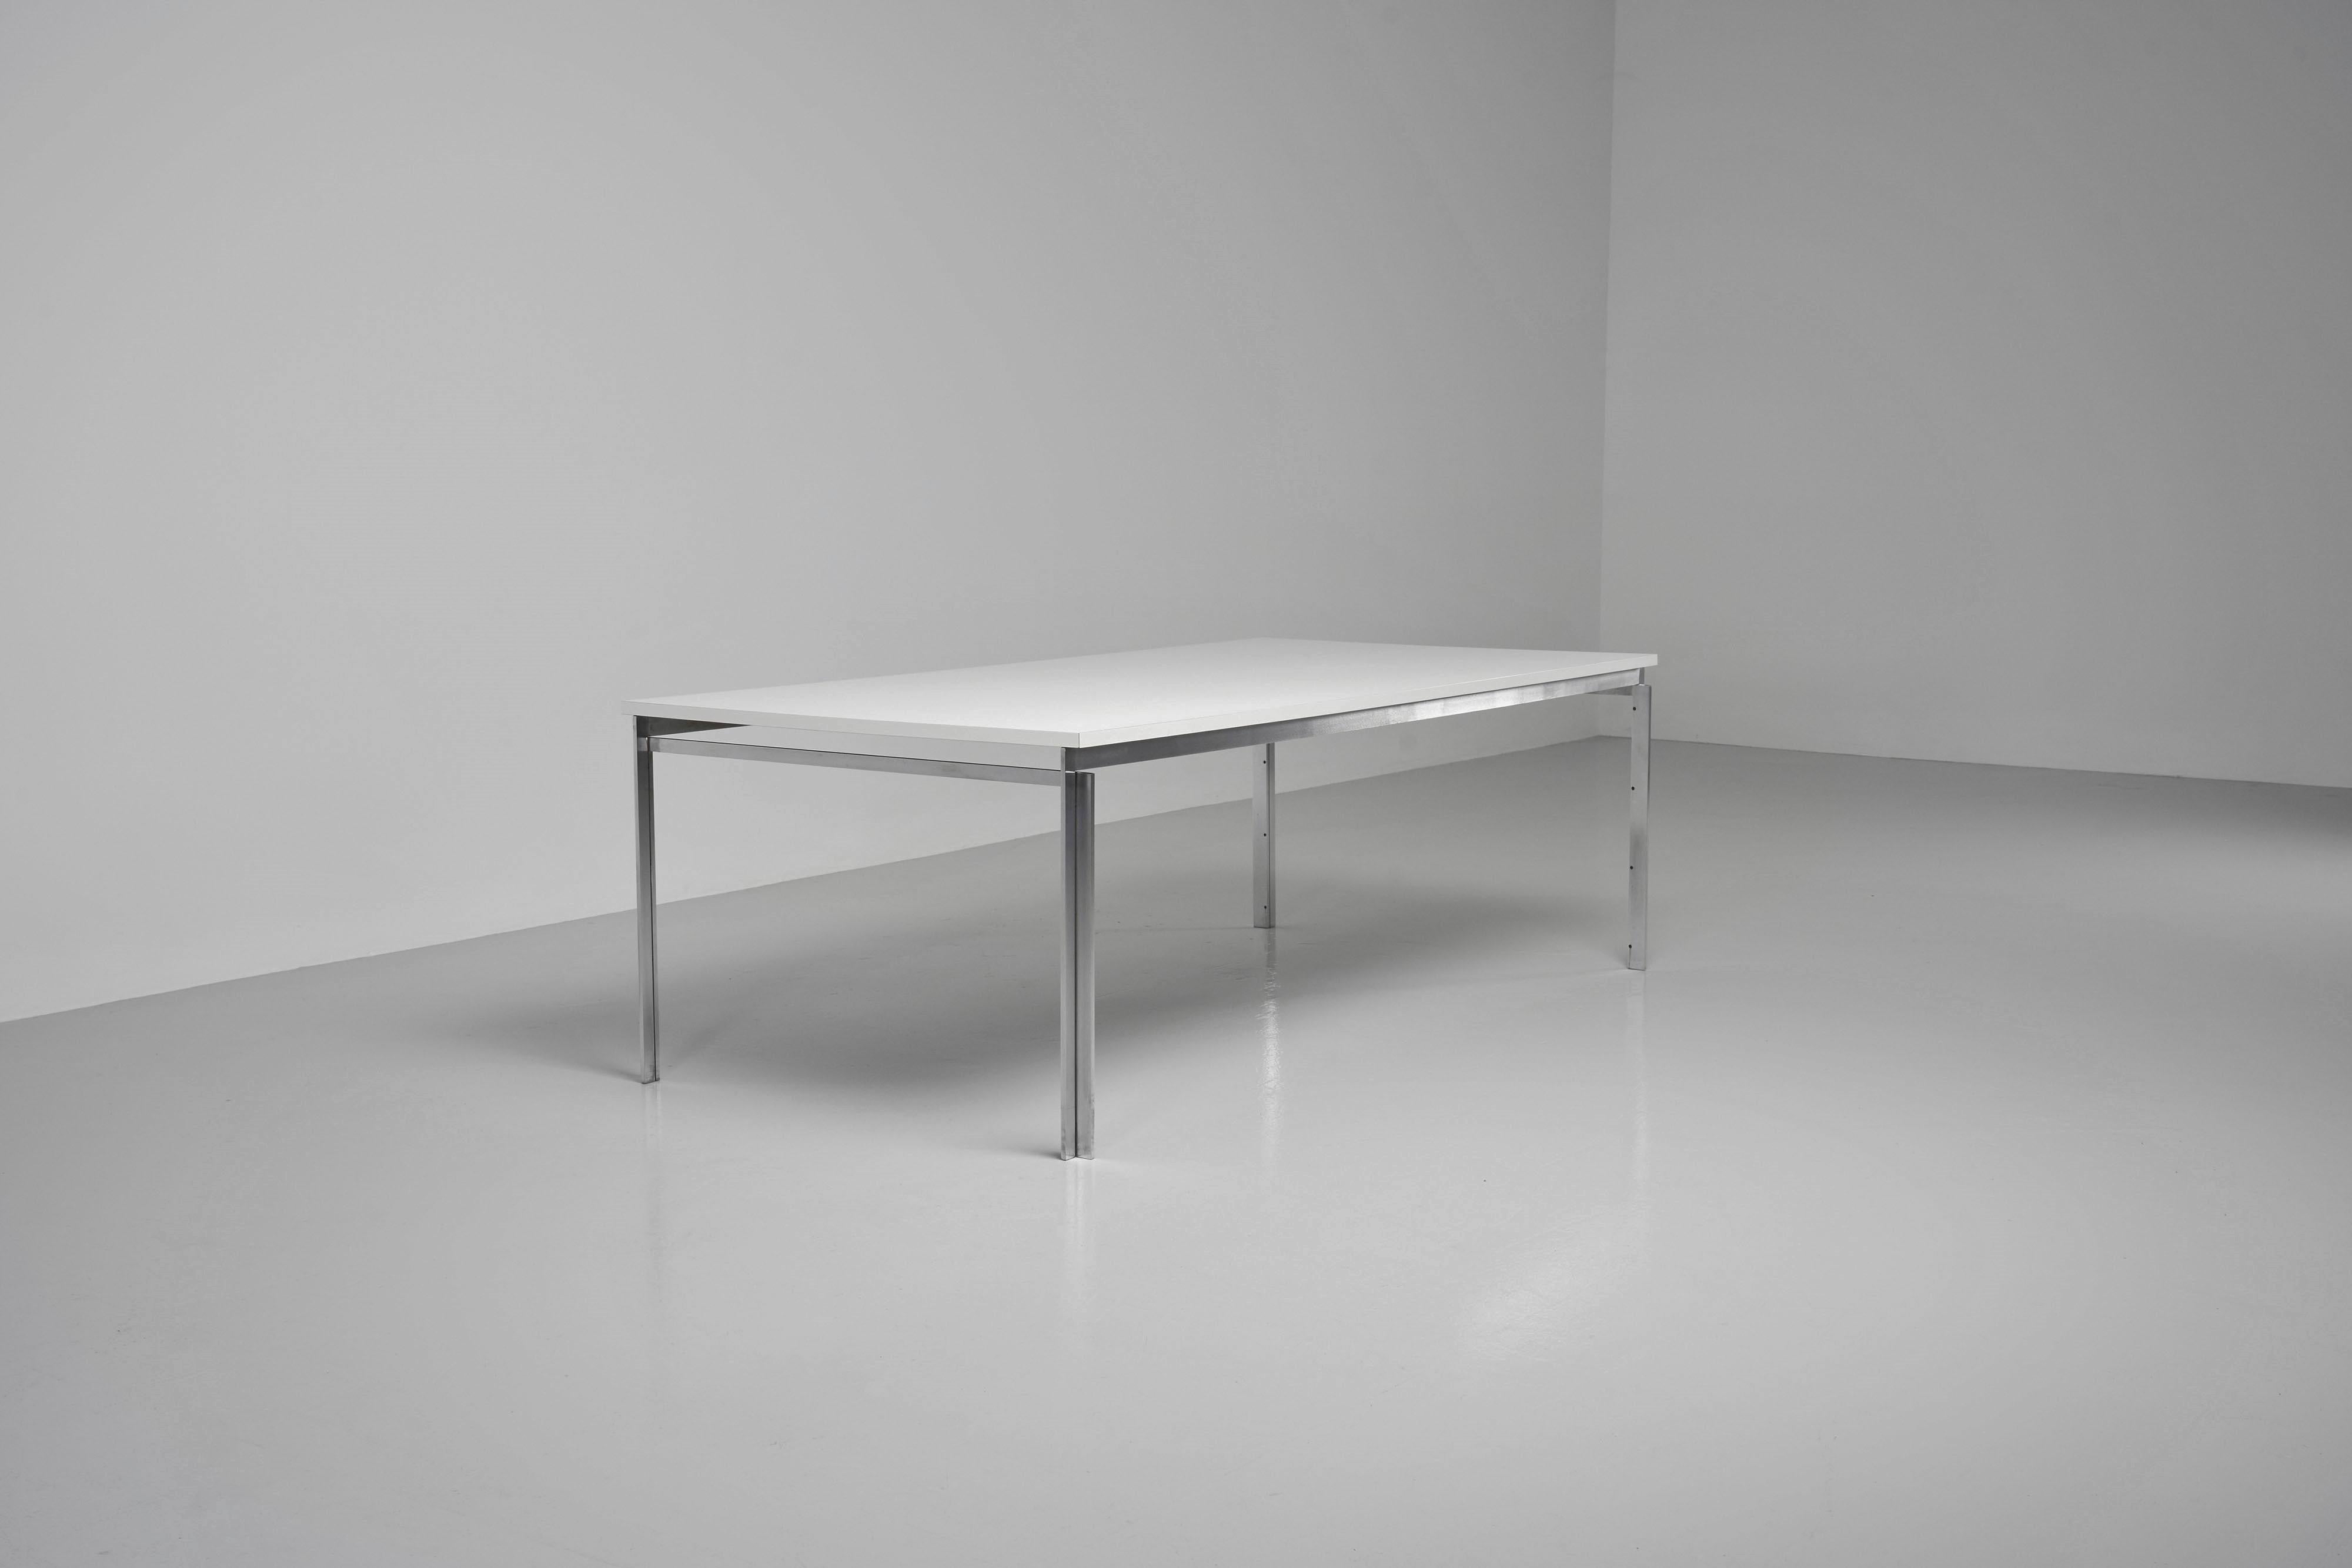 Rare early edition of the PK55 designed by Poul Kjaerholm and manufactured by Ejvind Kold Christensen, Denmark 1957. This table designed by one of the best furniture architects of the 20th century, was minimalistic as all other Kjaerholms designs.